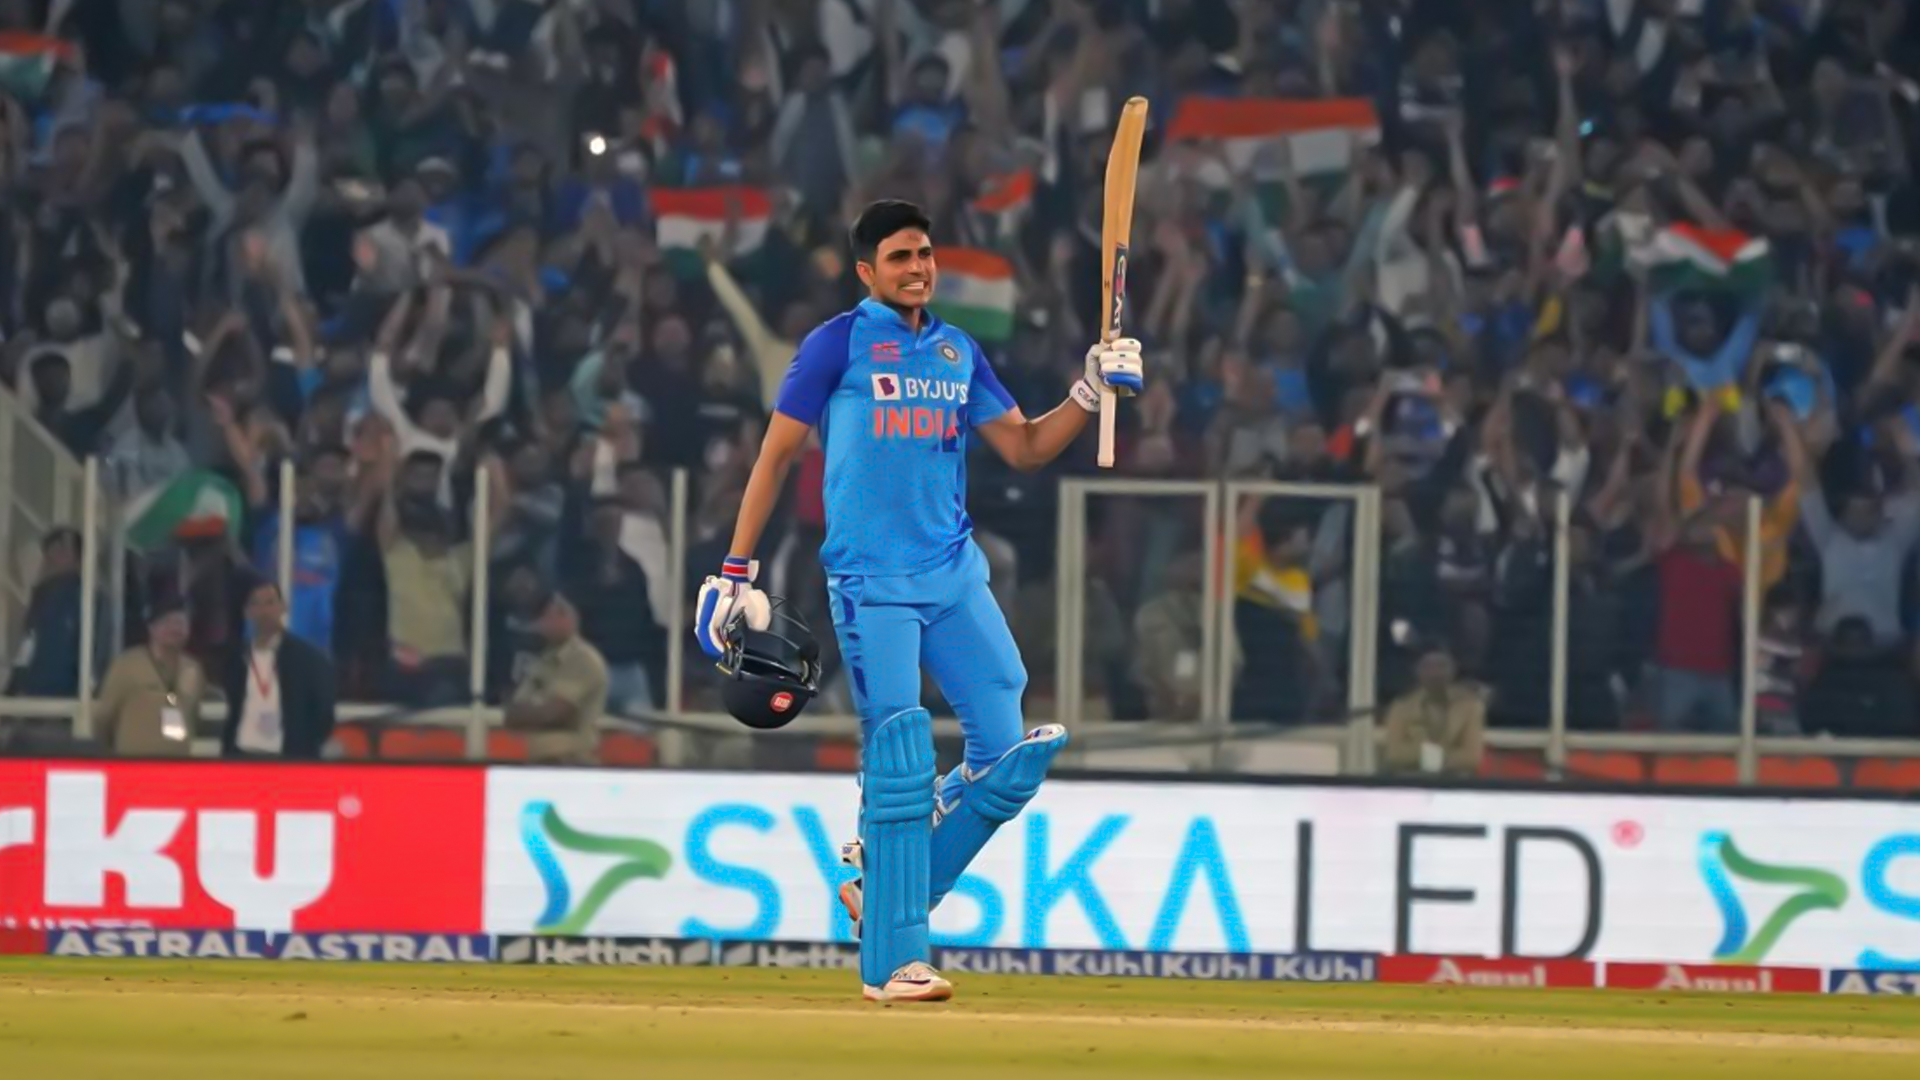 100 Ruppes Story Behind Success Of Shubman Gill; Check Full Story